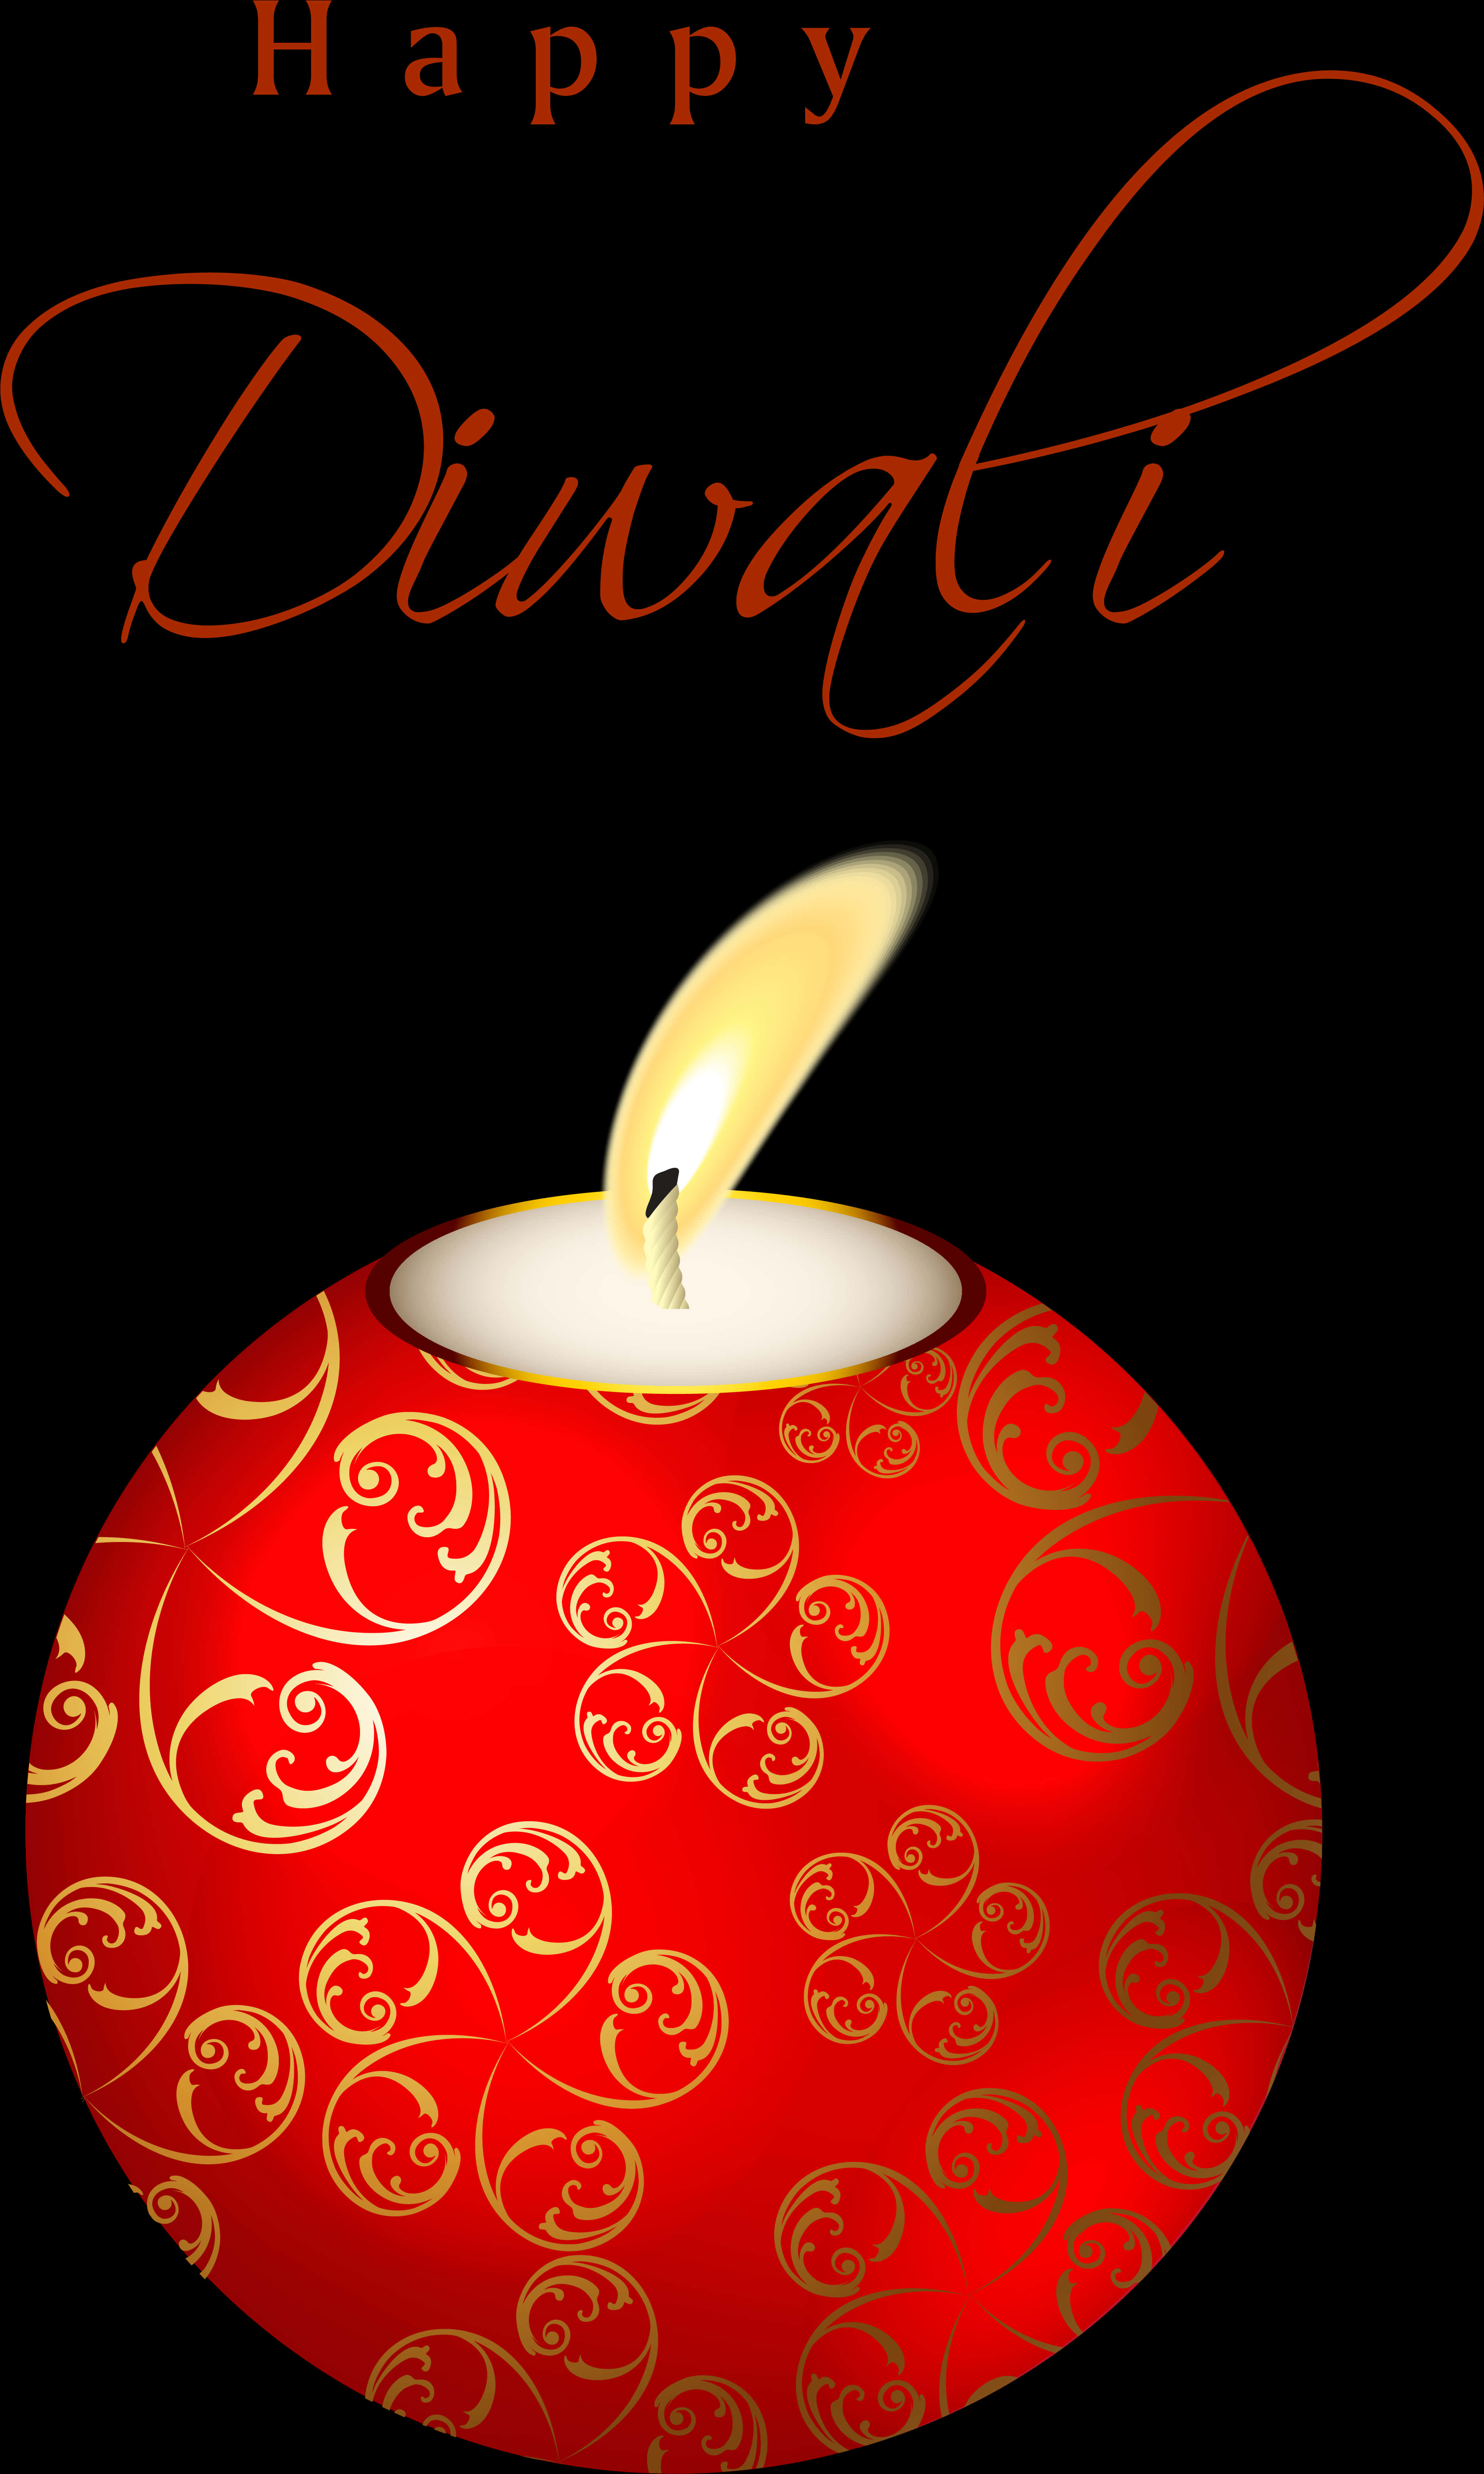 A Red Candle With Gold Patterns